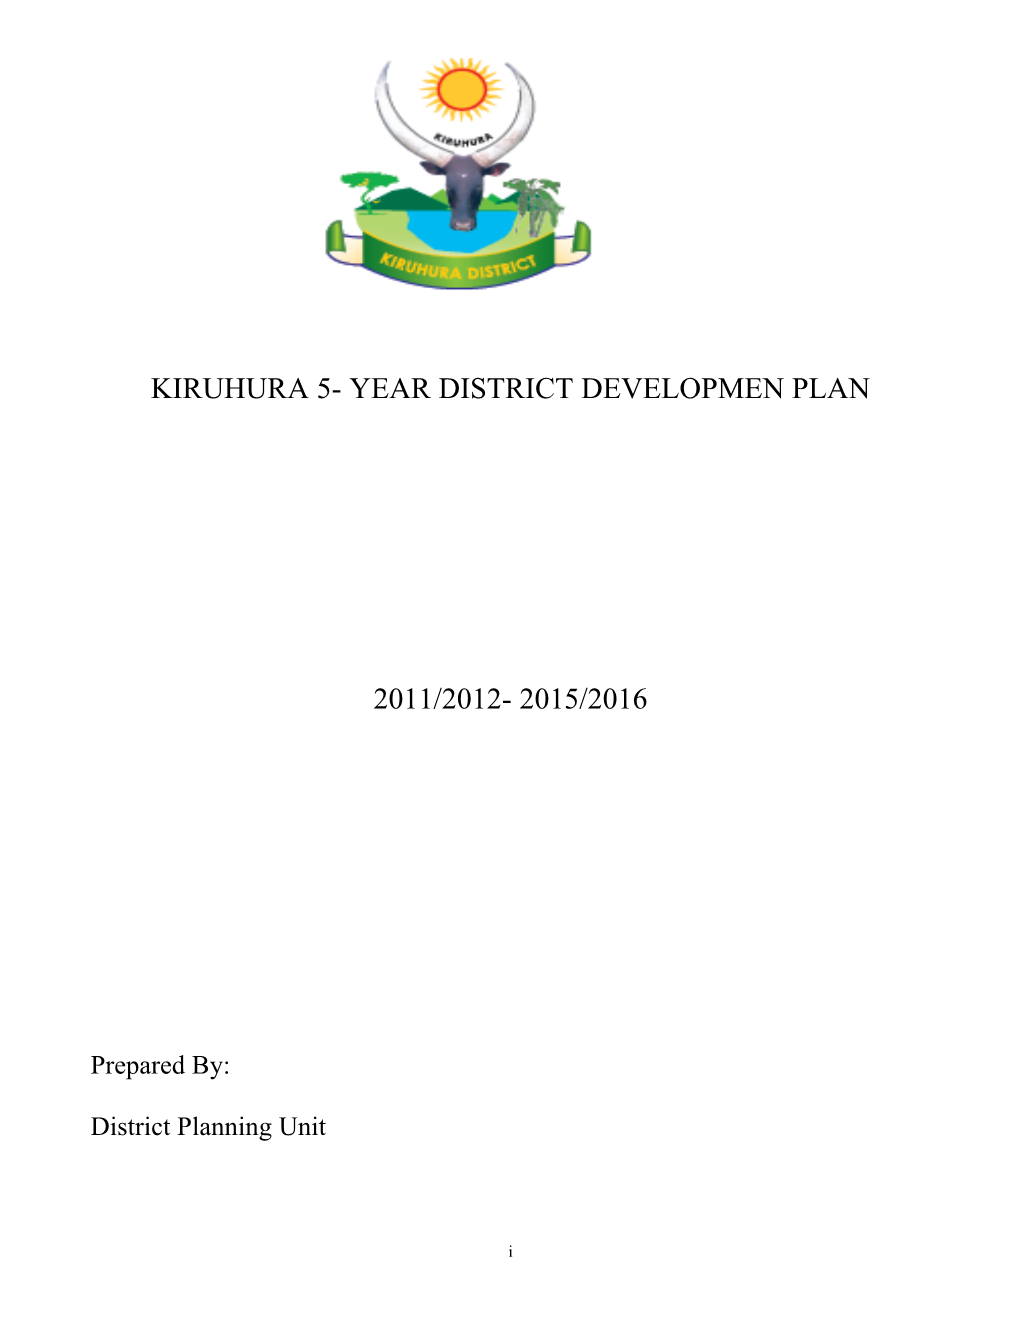 Kiruhura District Local Government MGLSD - Ministry of Gender, Labour and Social Development